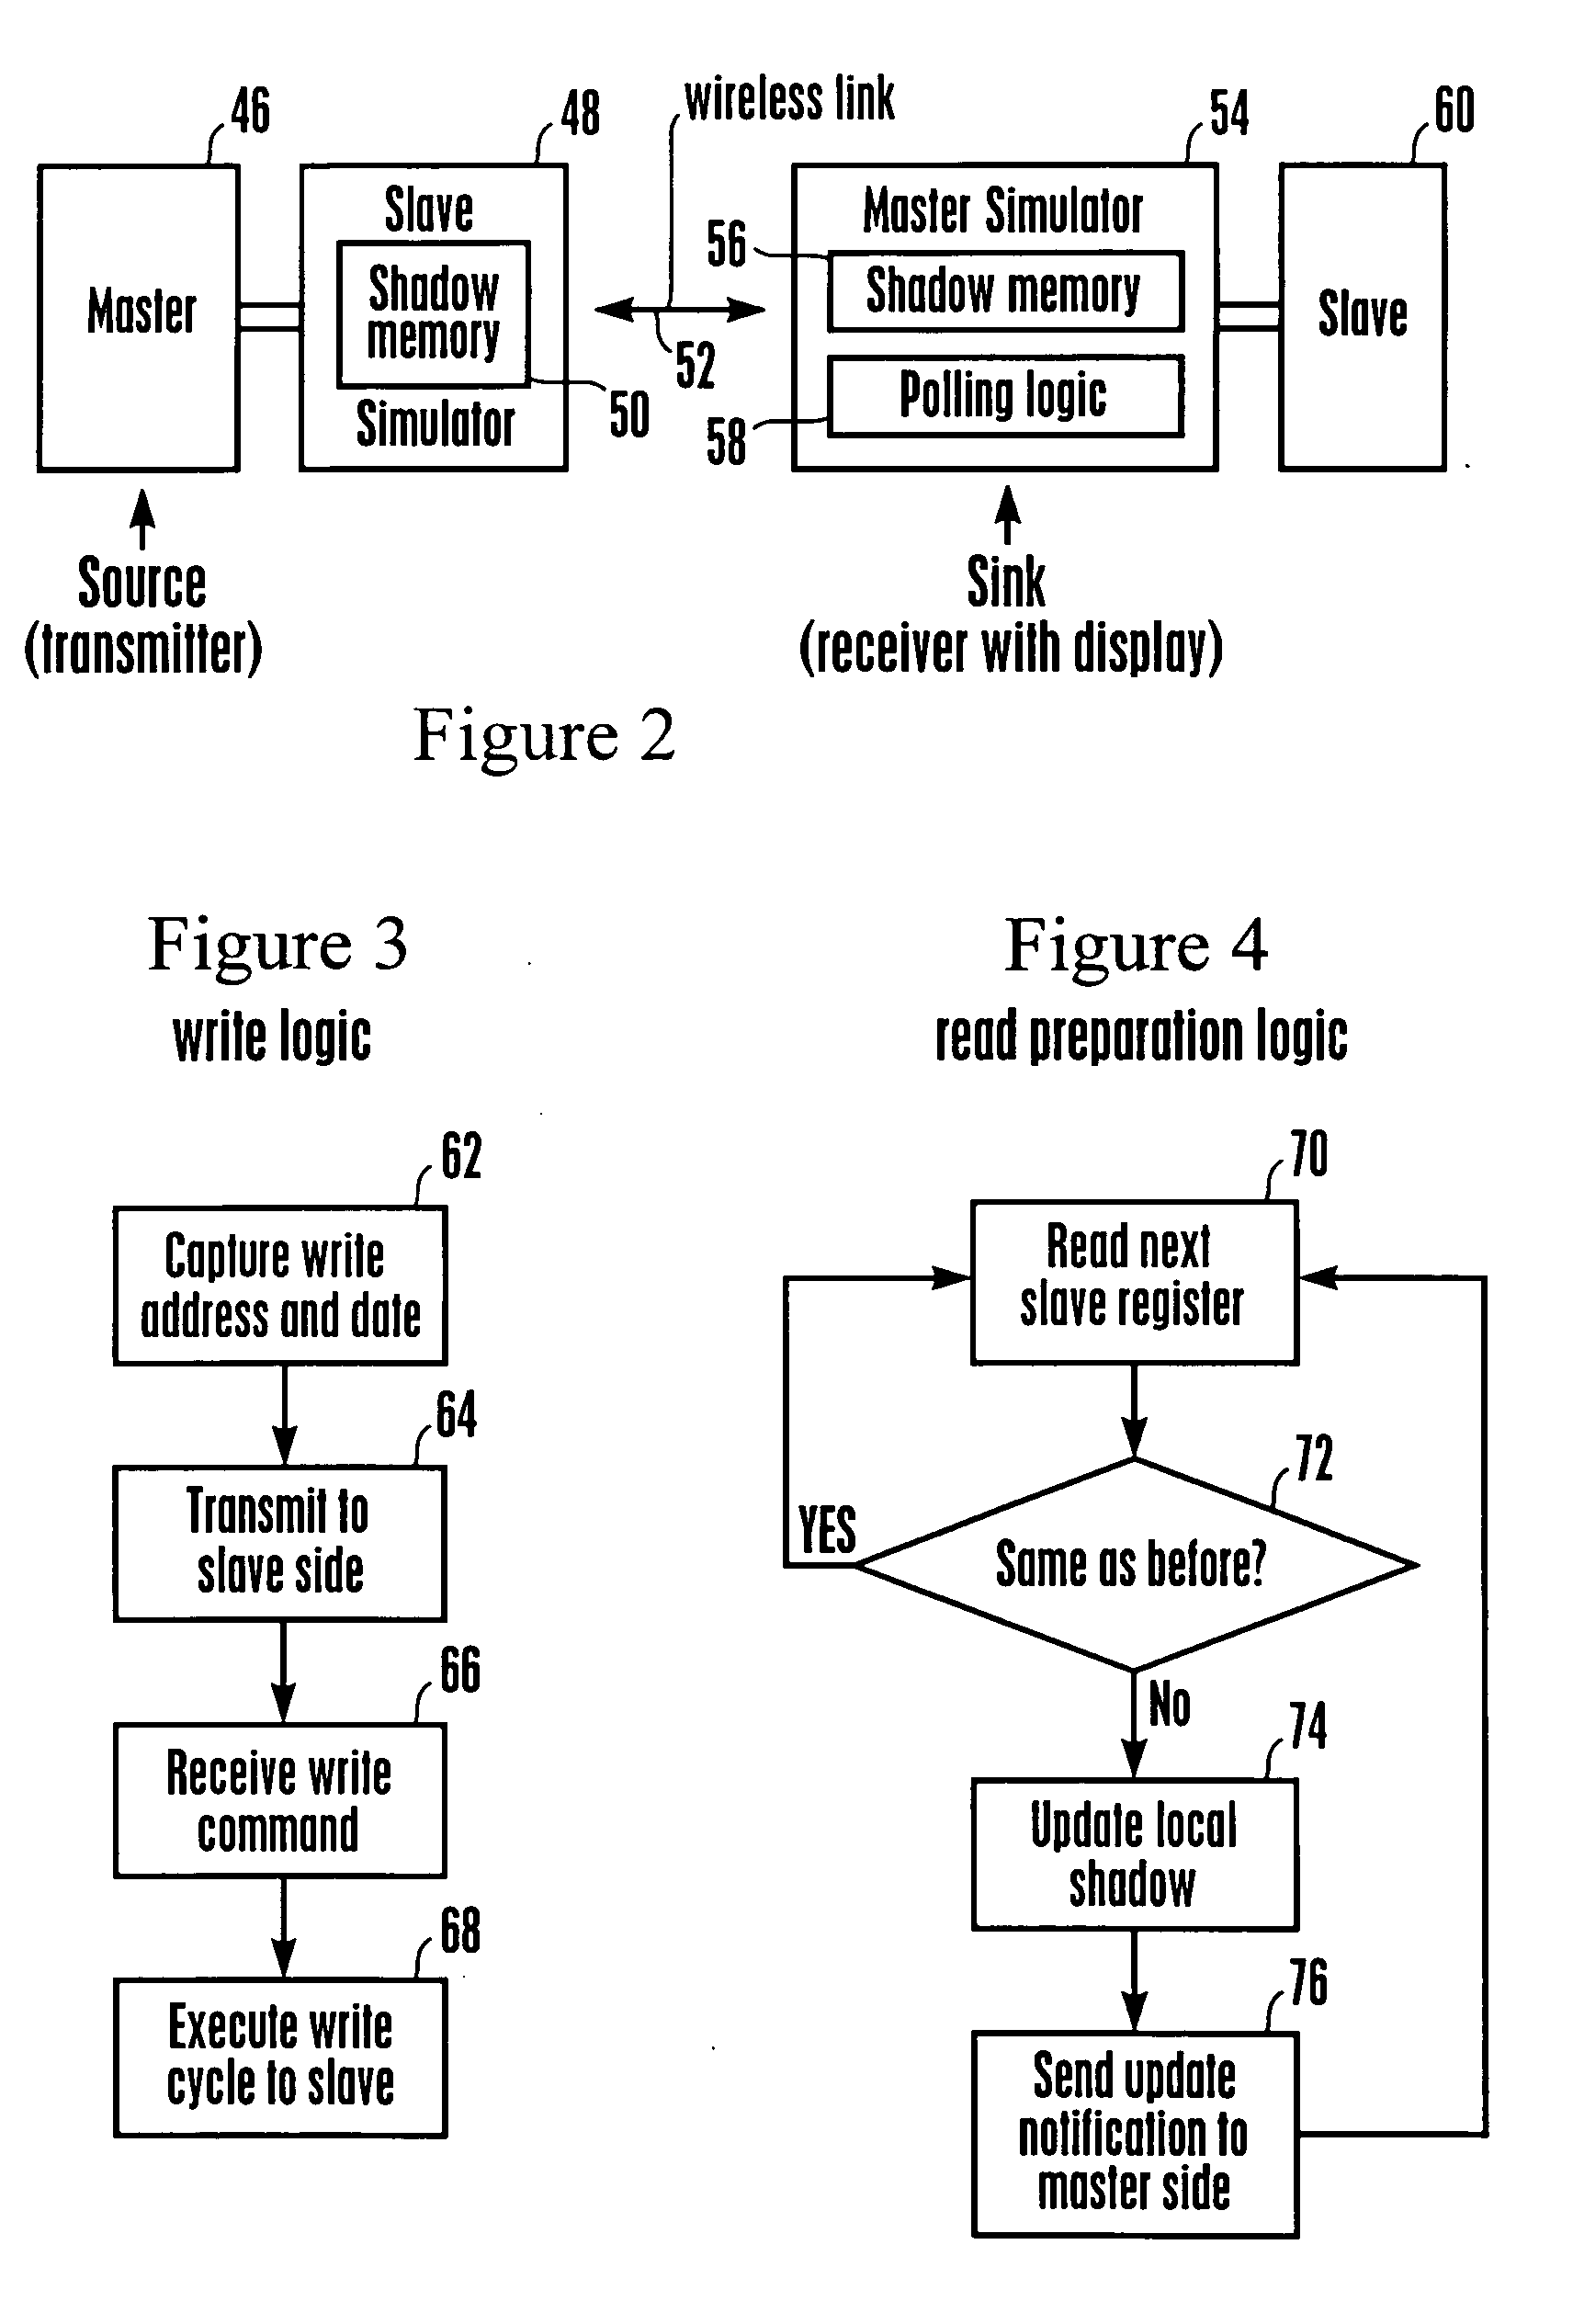 Method and system for wireless transmission